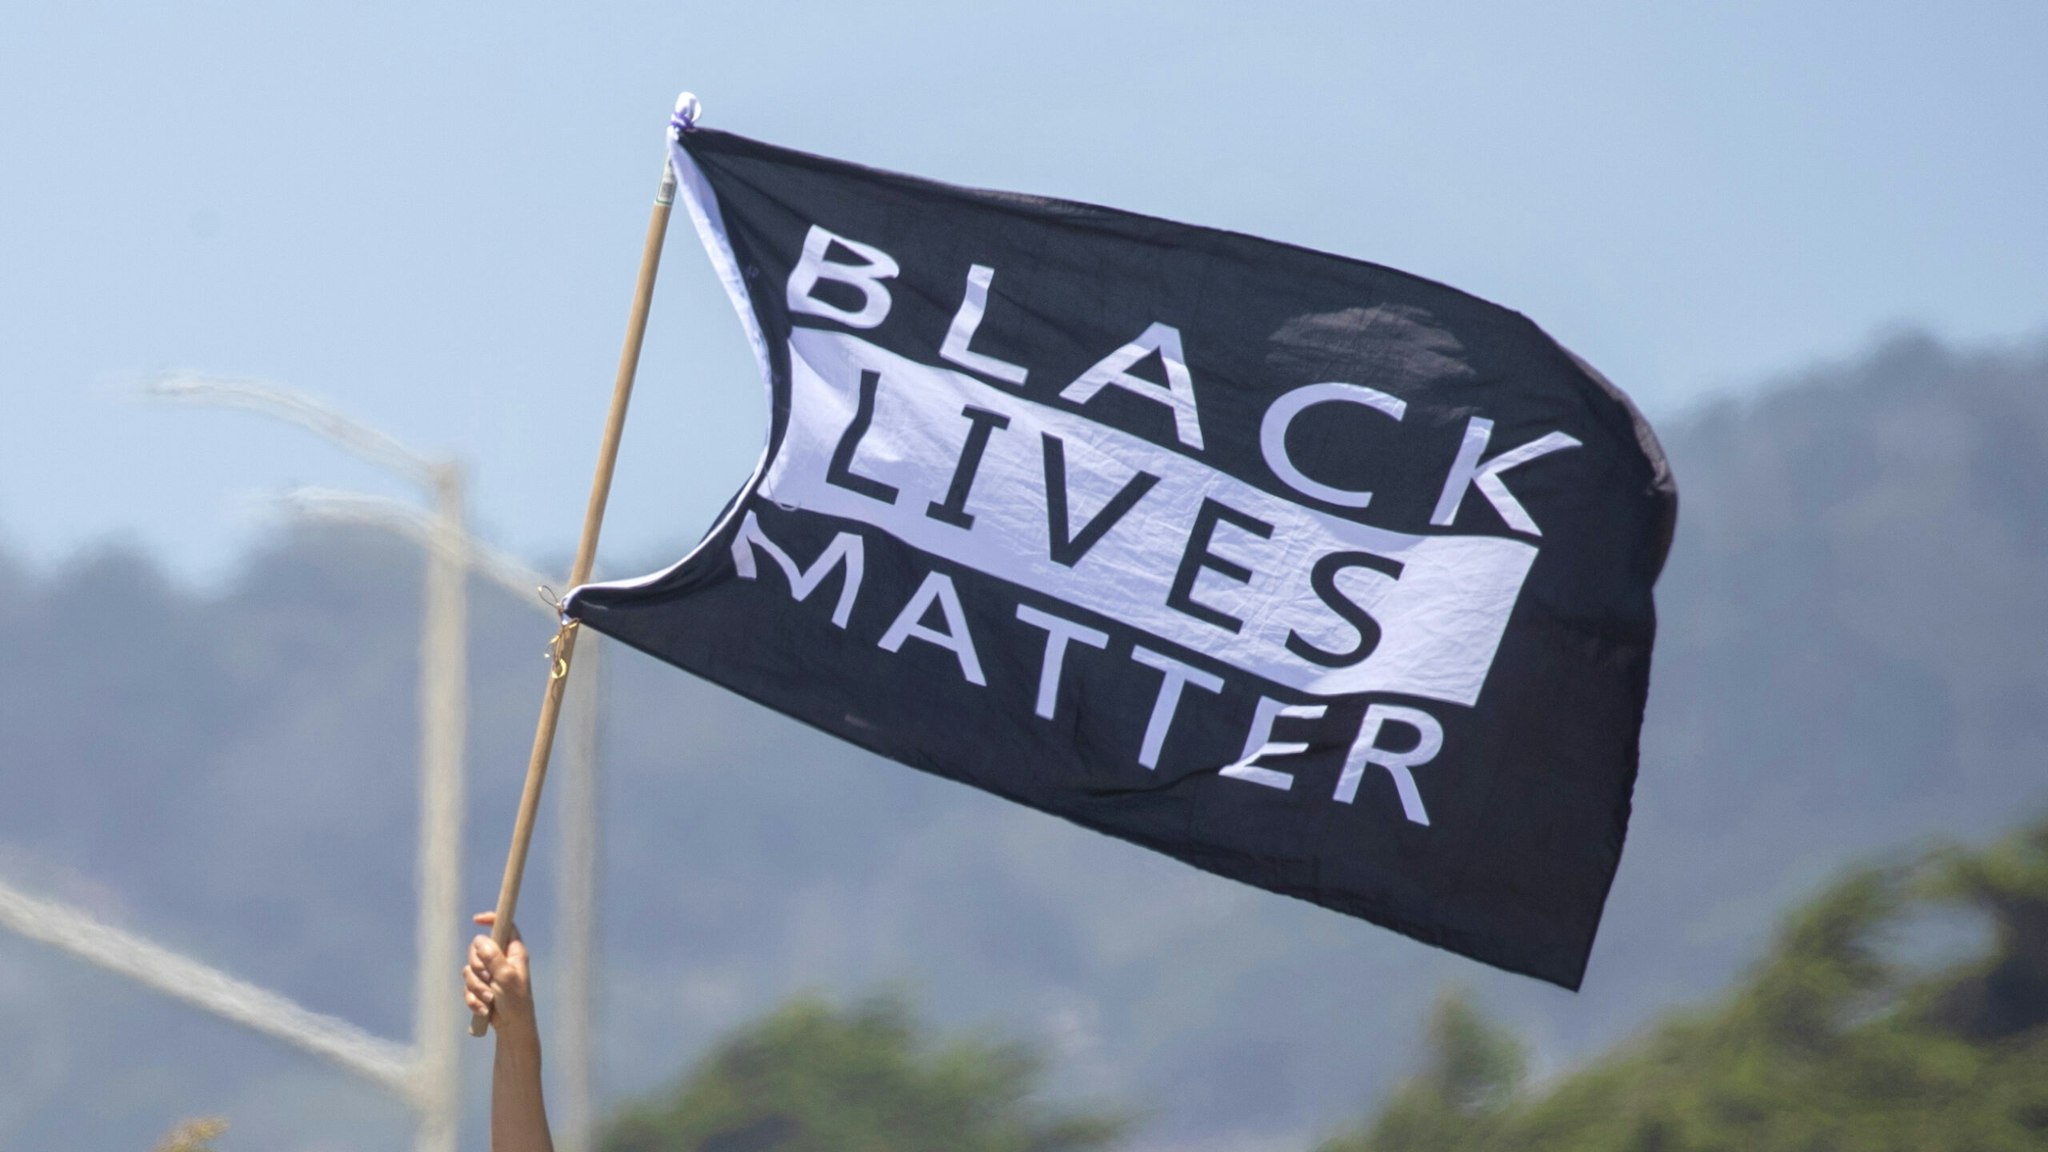 SAN FRANCISCO, CA.- JUNE 2: Black Lives Matter marchers are greeted by a flag-waving supporter on the Great Highway in San Francisco, Tuesday, June 2, 2020.